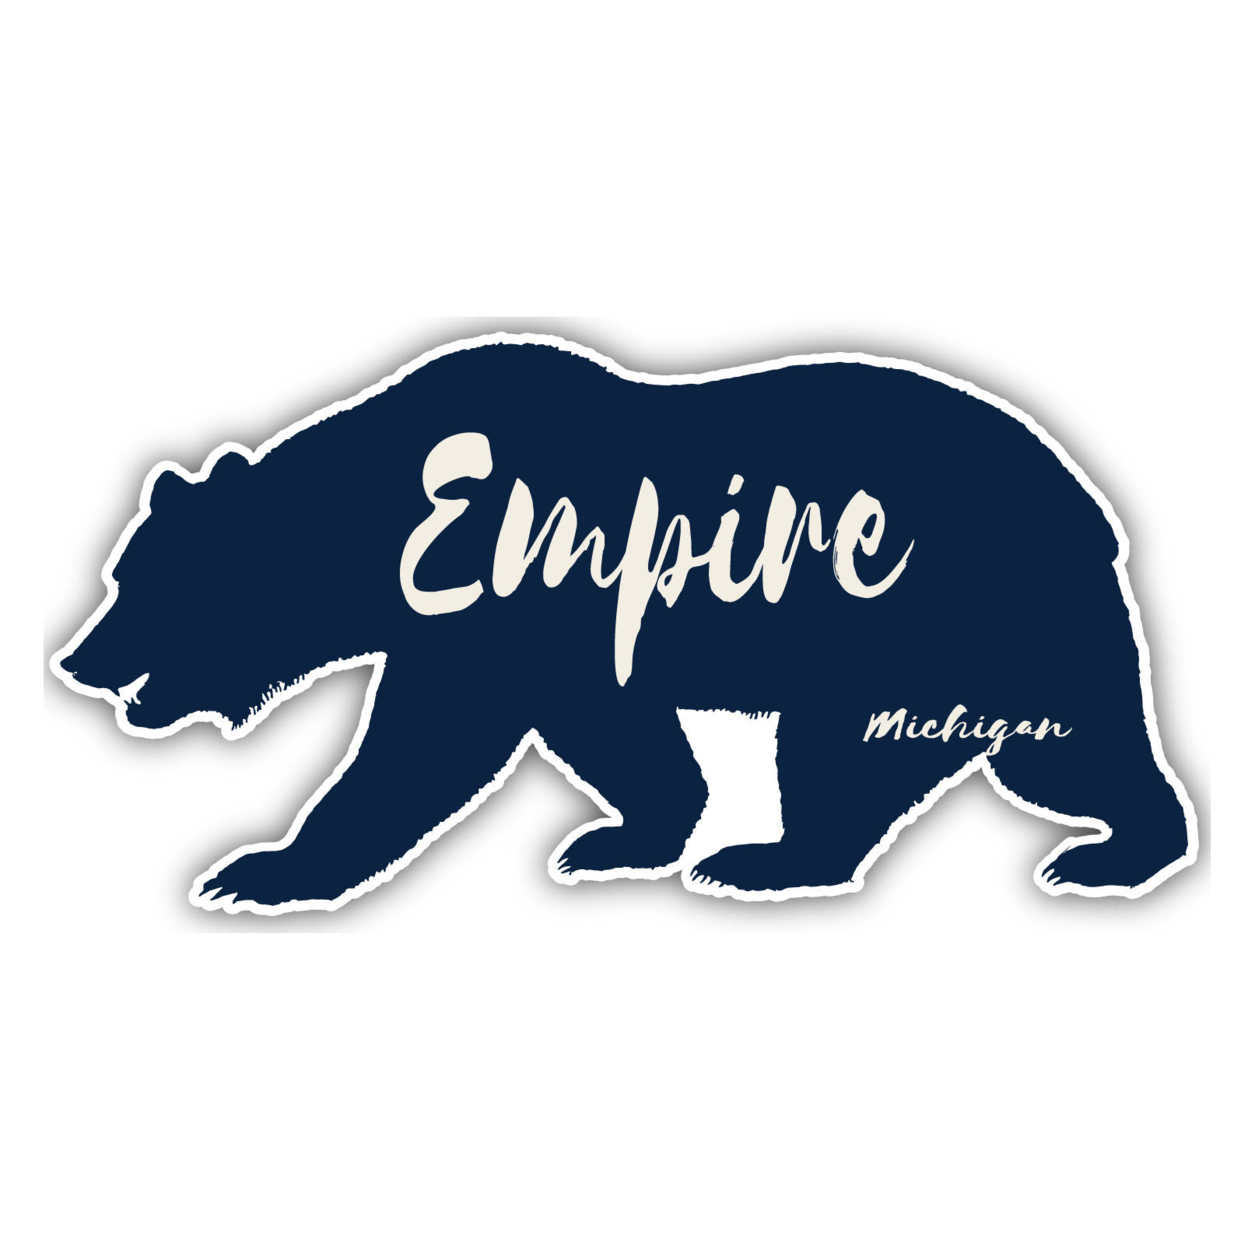 Empire Michigan Souvenir Decorative Stickers (Choose Theme And Size) - 4-Pack, 4-Inch, Bear